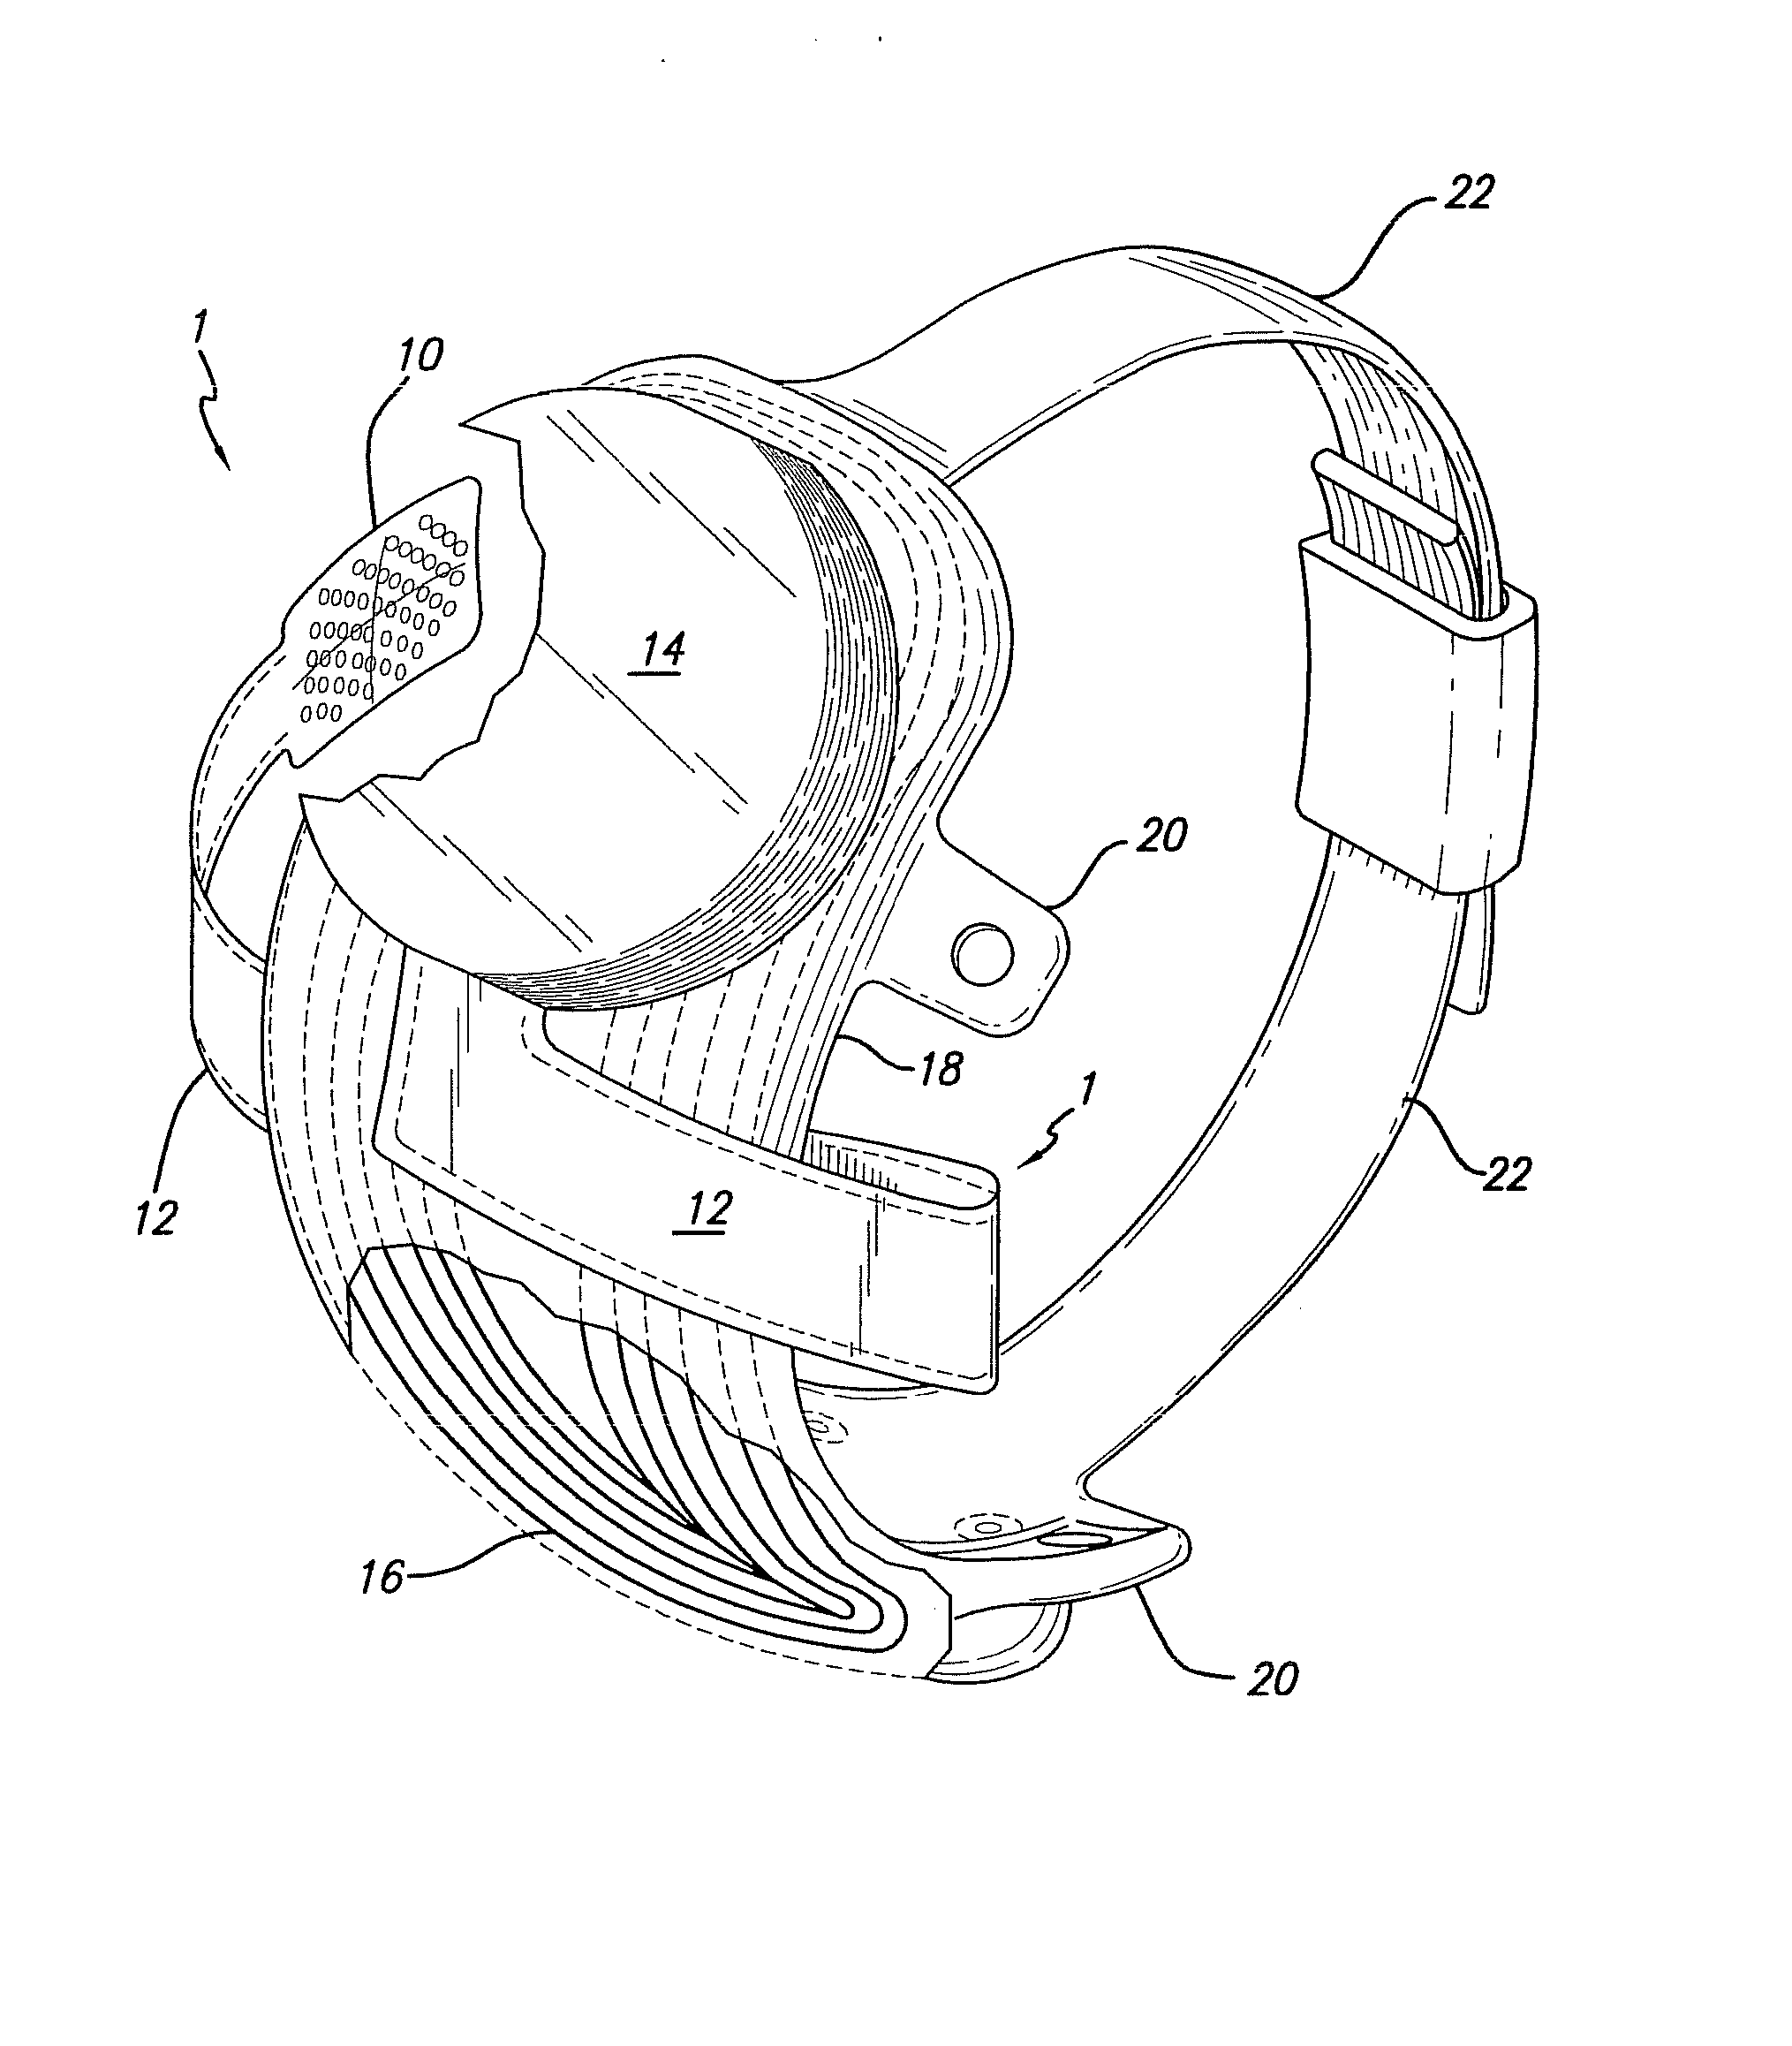 Flexible Circuit Electrode Array with at Least one Tack Opening